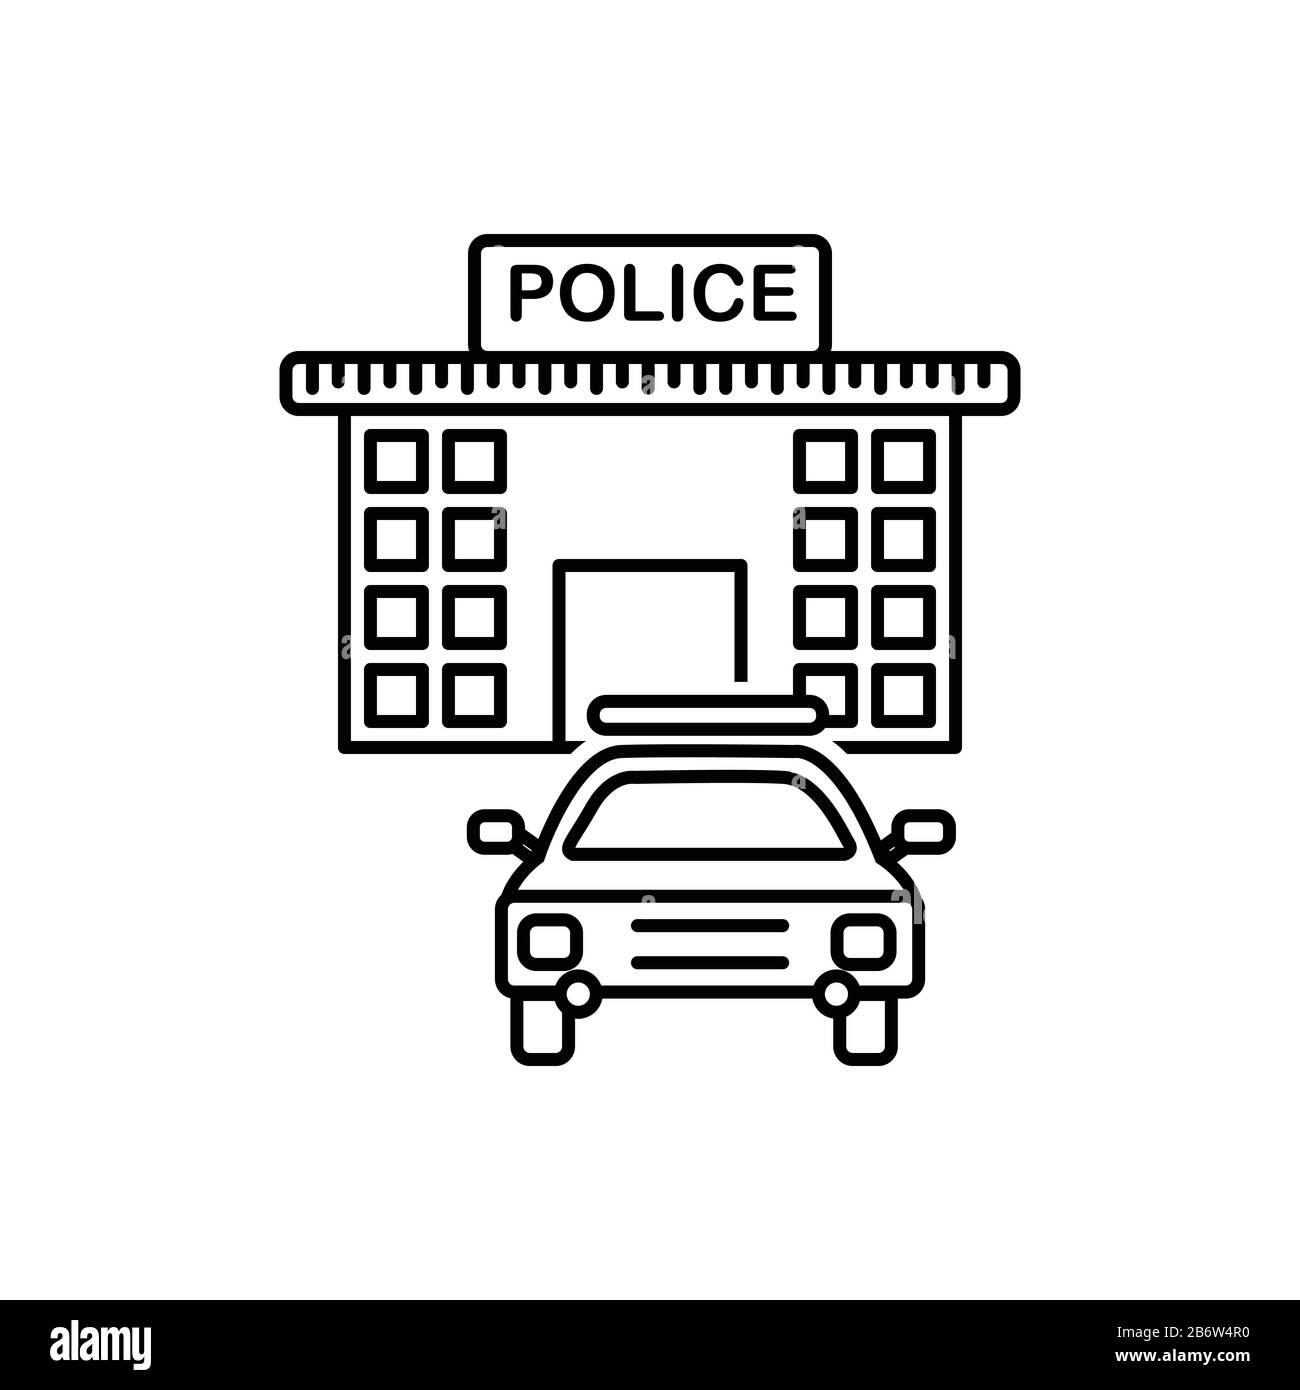 Police station icon Stock Vector